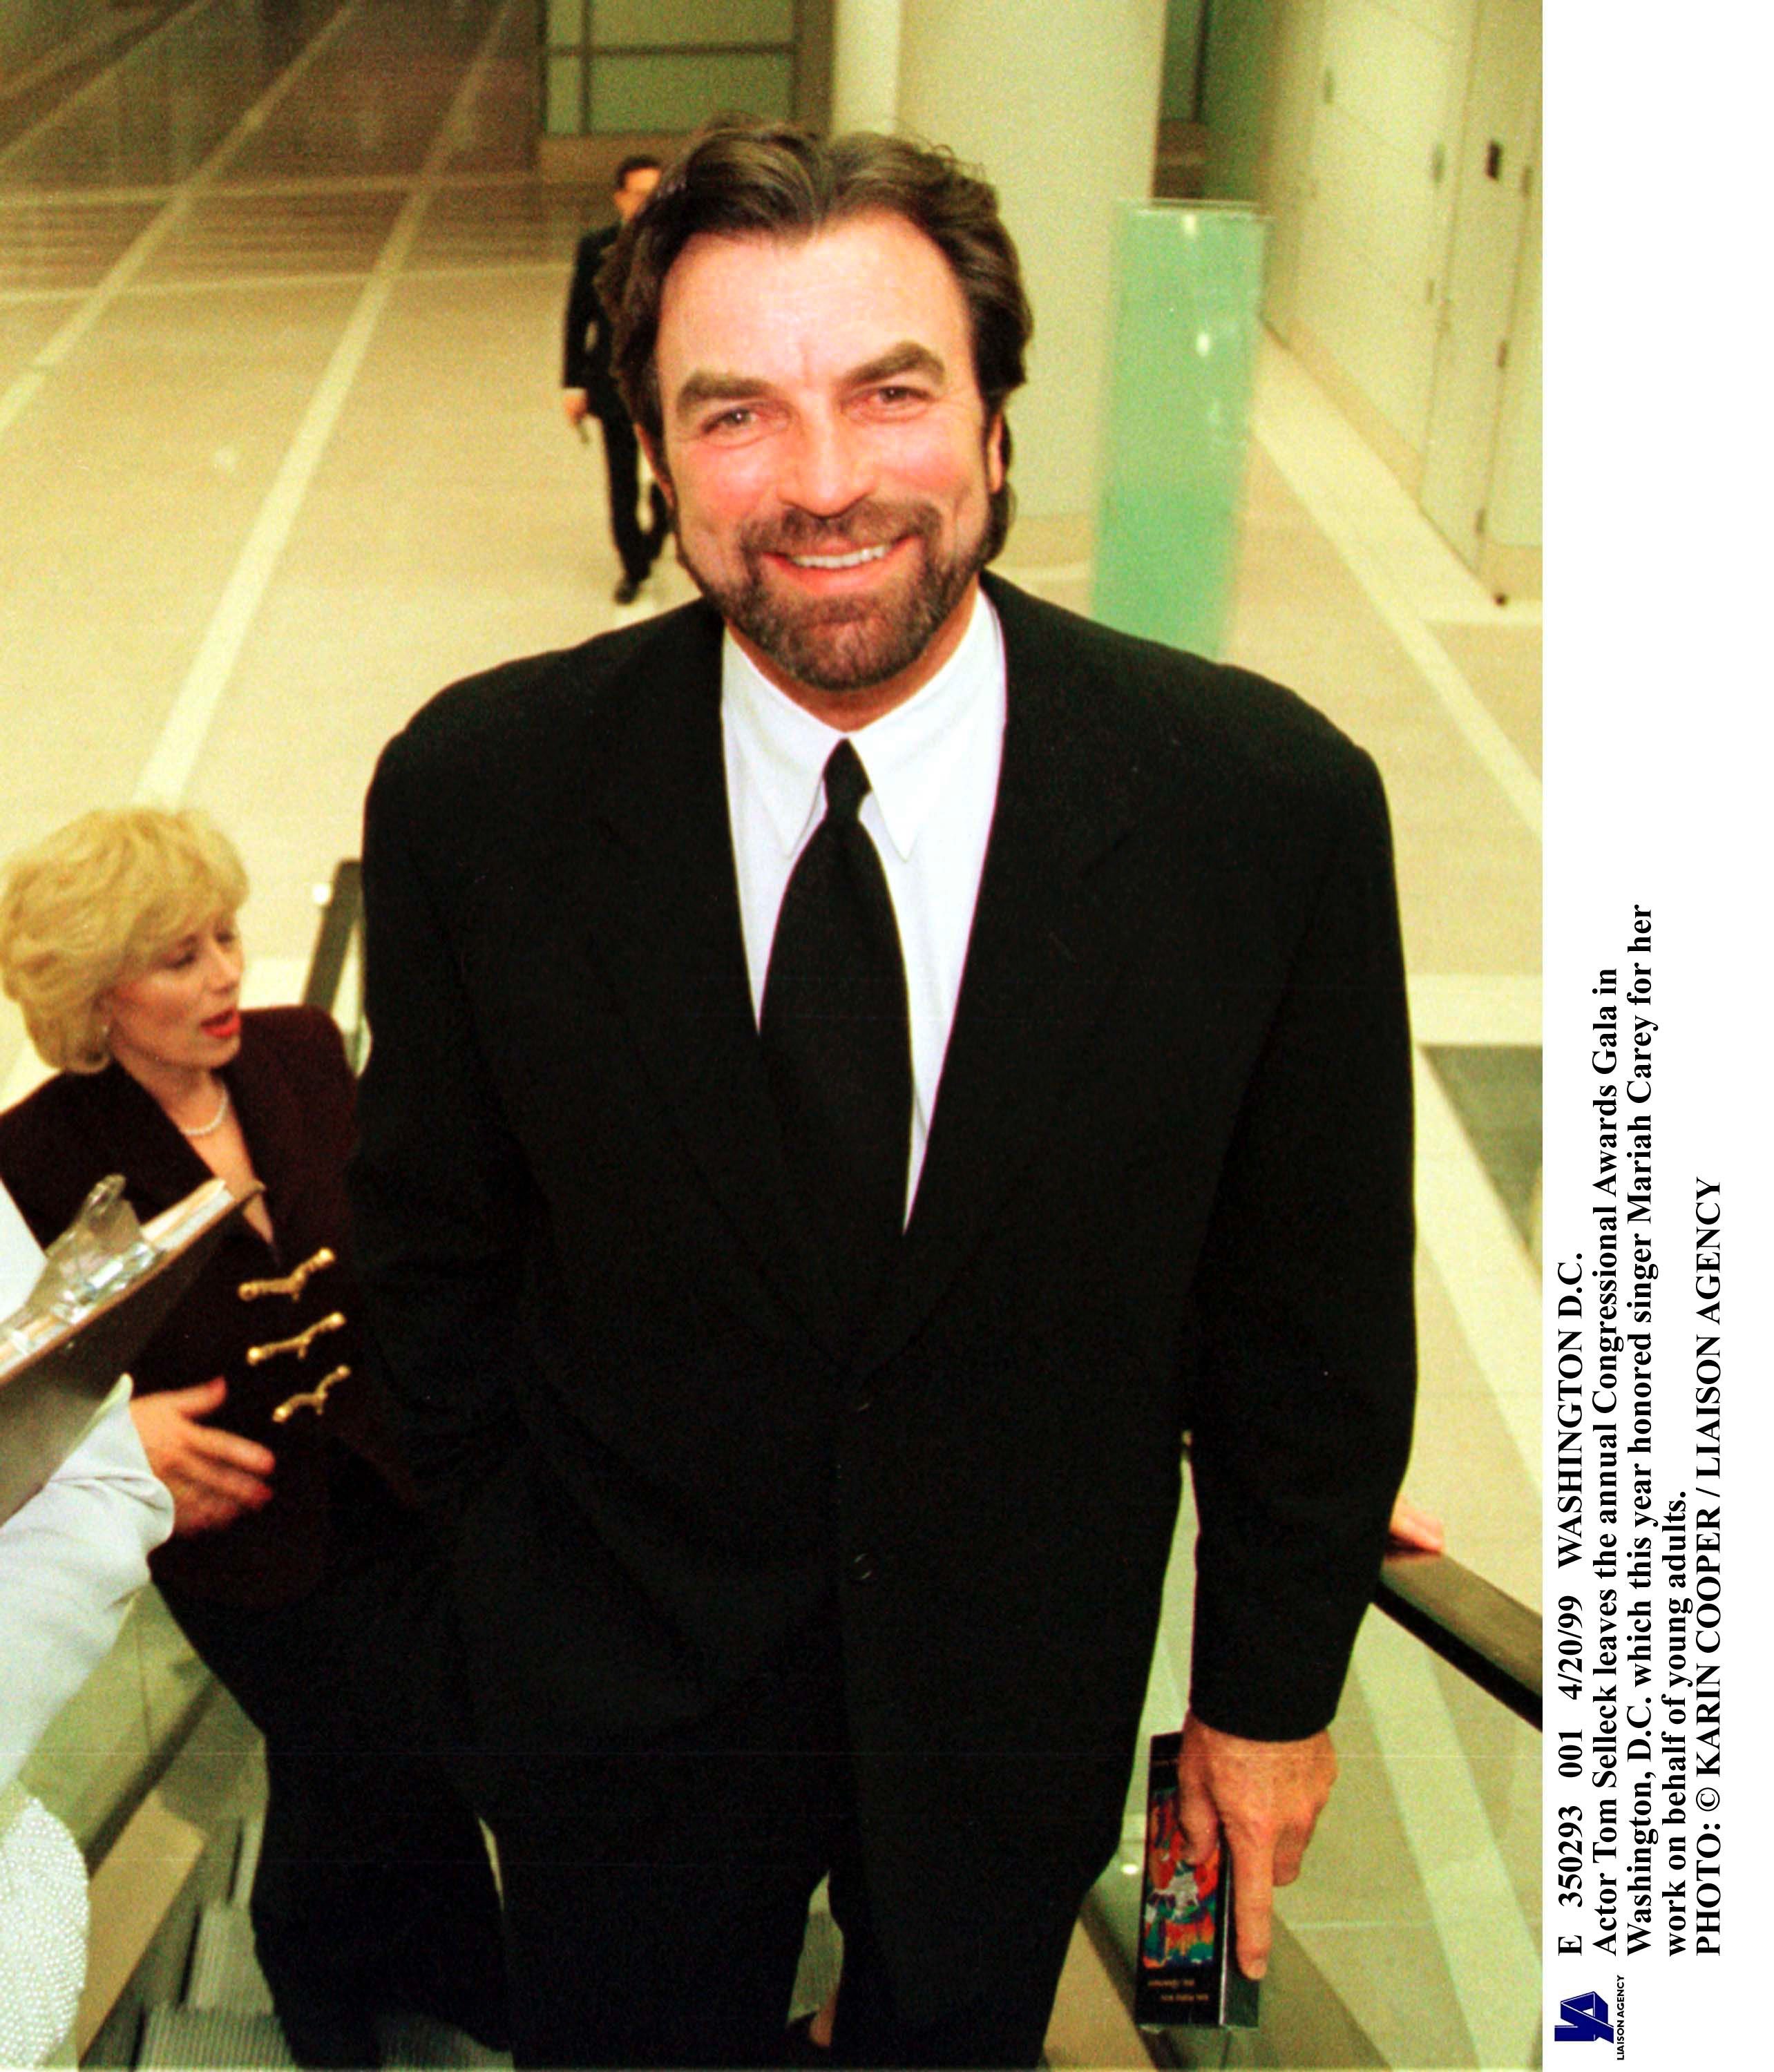 Tom Selleck during The Annual Congressional Awards Gala In Washington, D.C. | Source: Getty Images